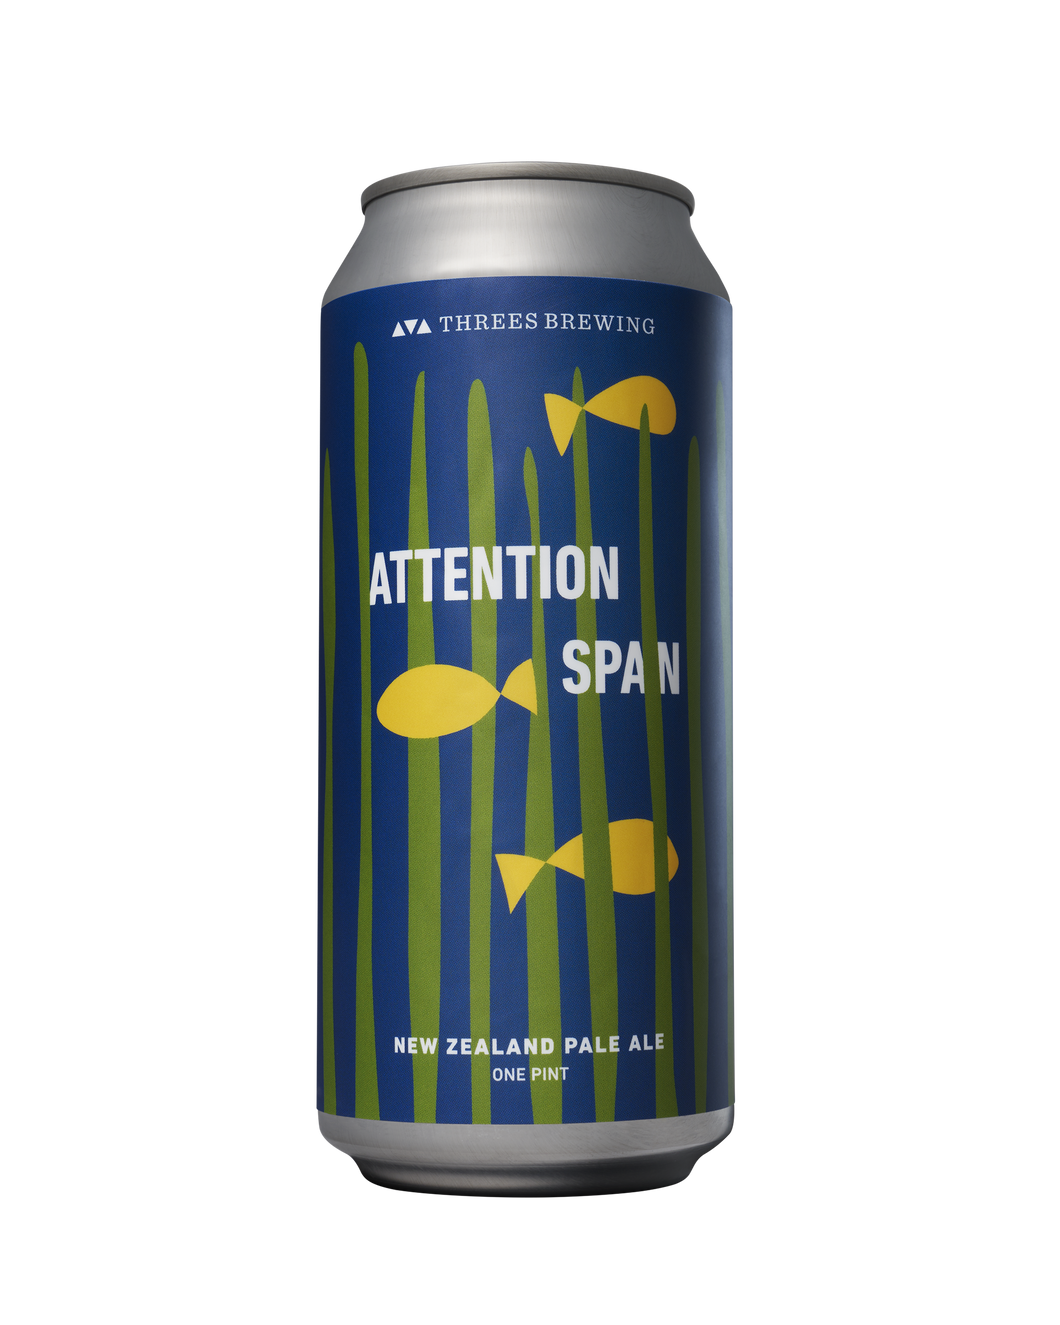 Single can of beer